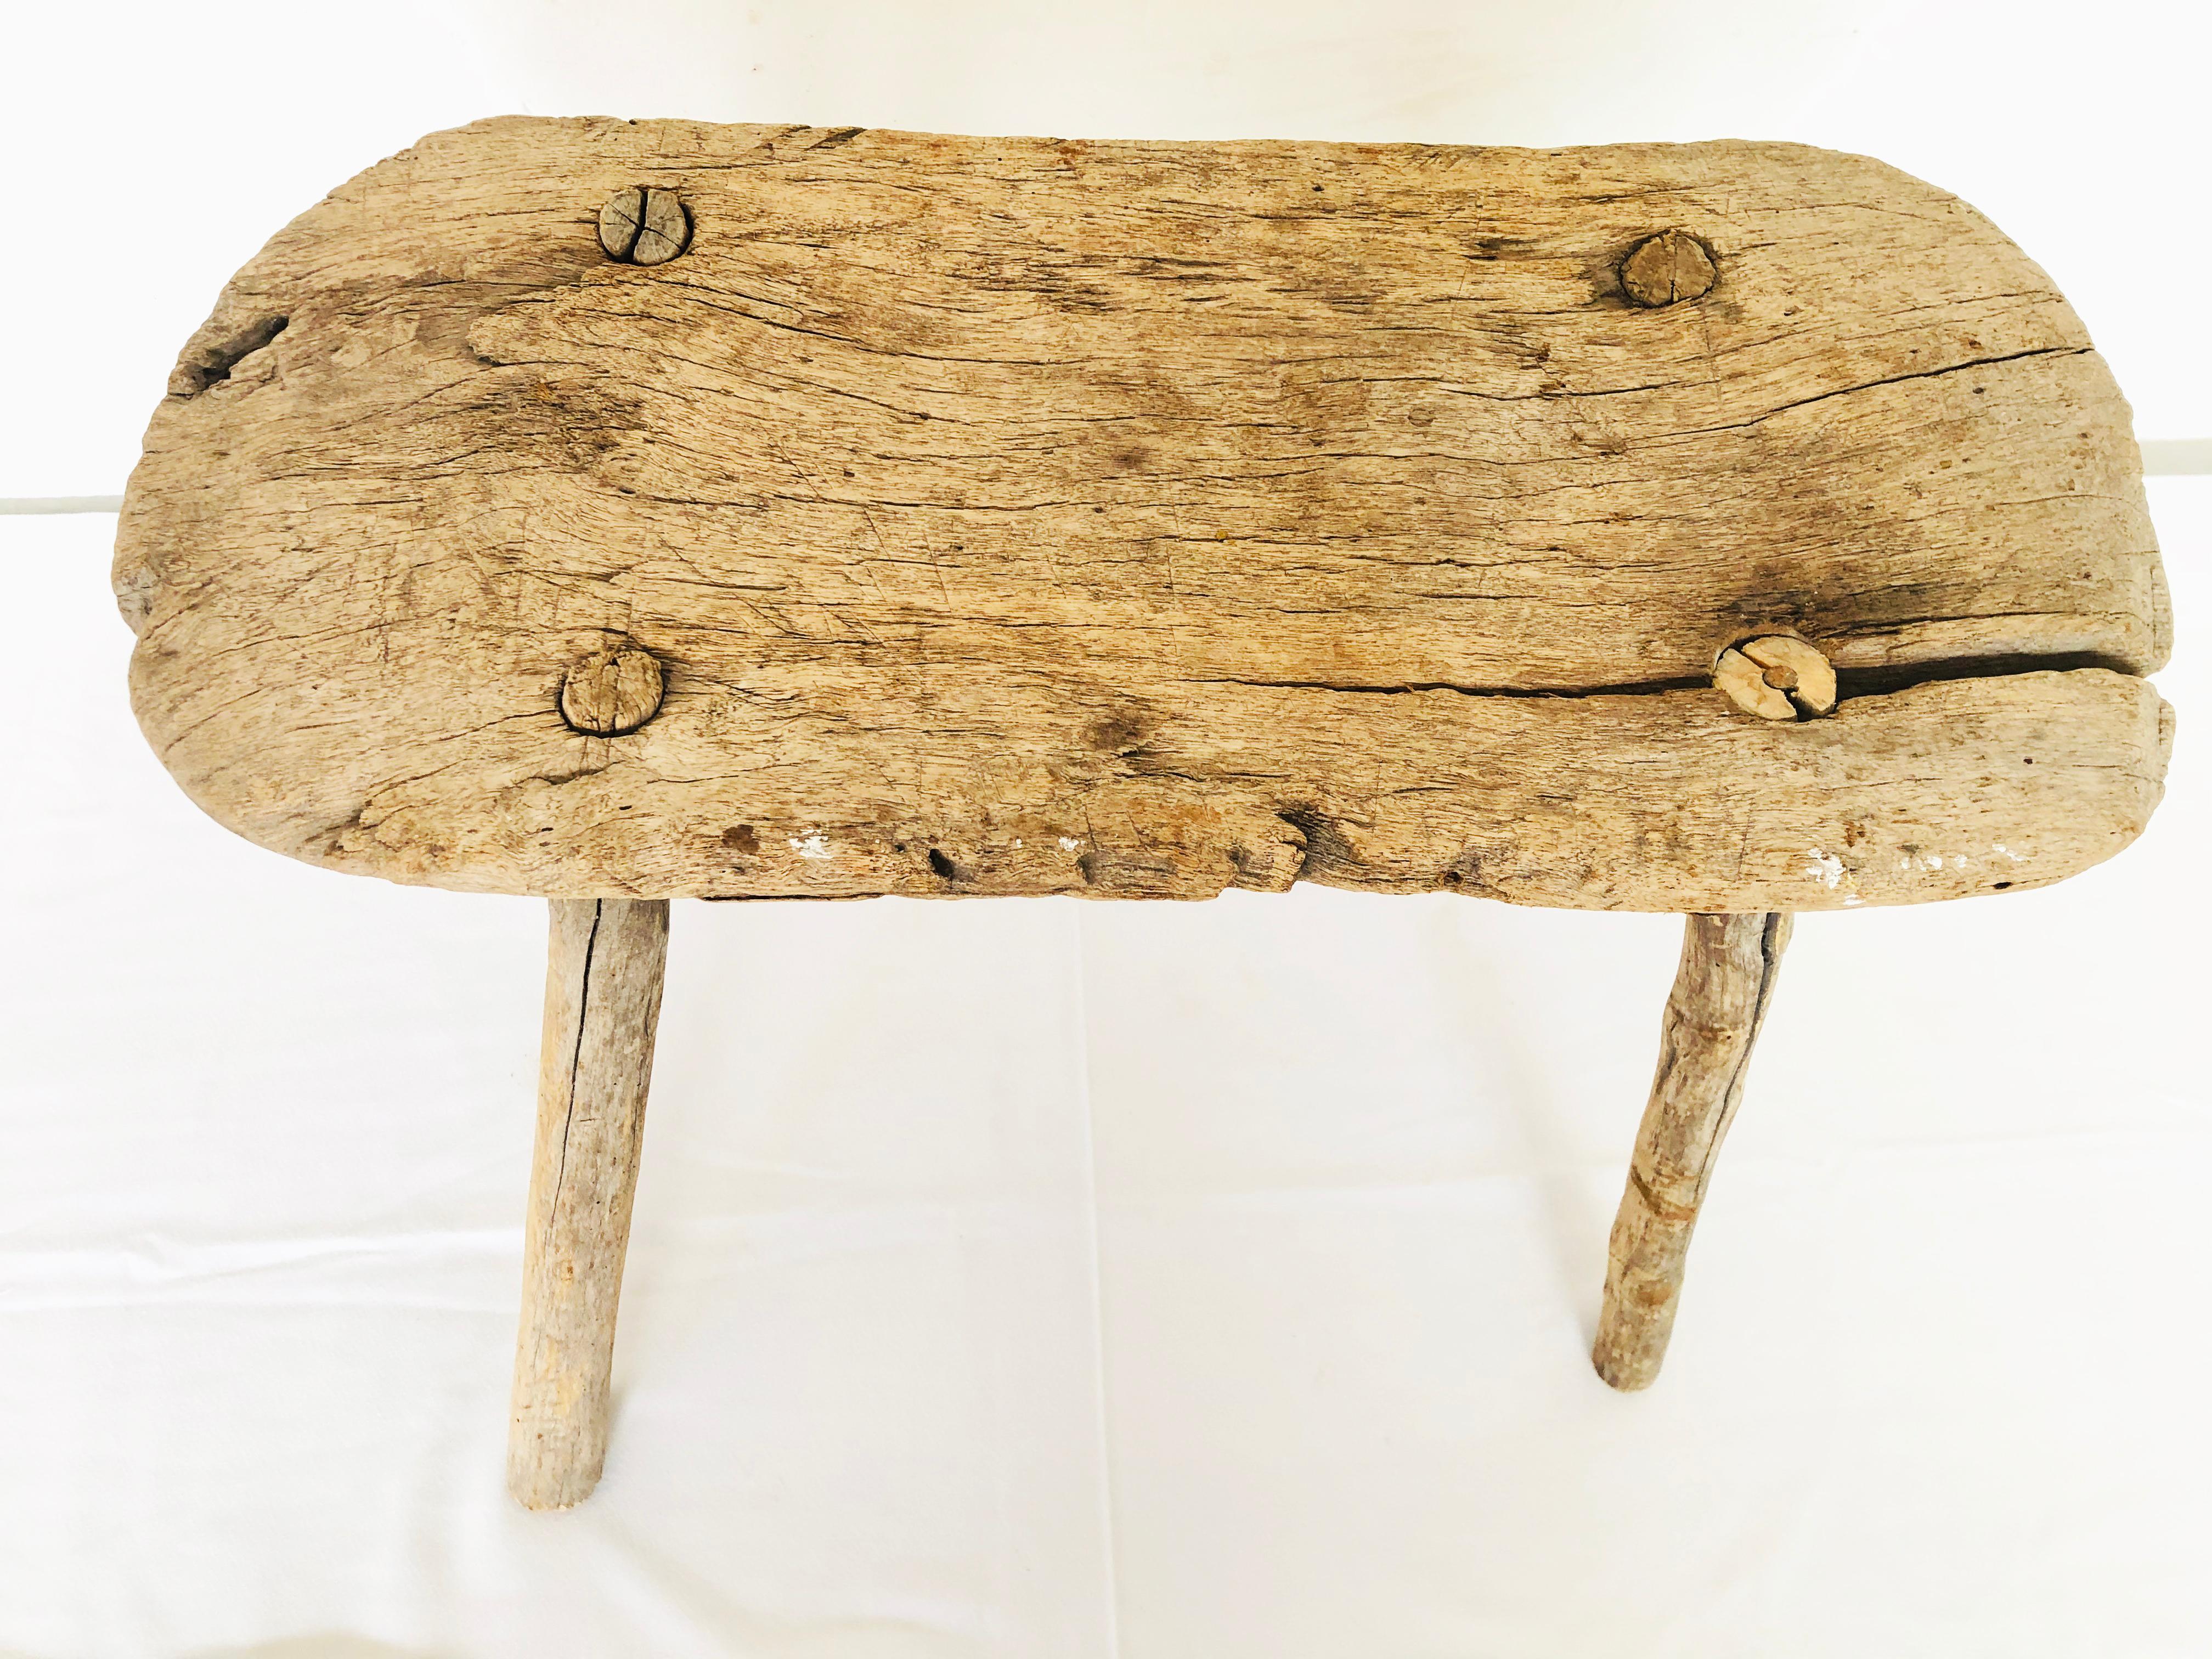 Antique natural solid mezquite wood table with thin rectangular top found in Western Mexico .
Great for side table or next to a tub.